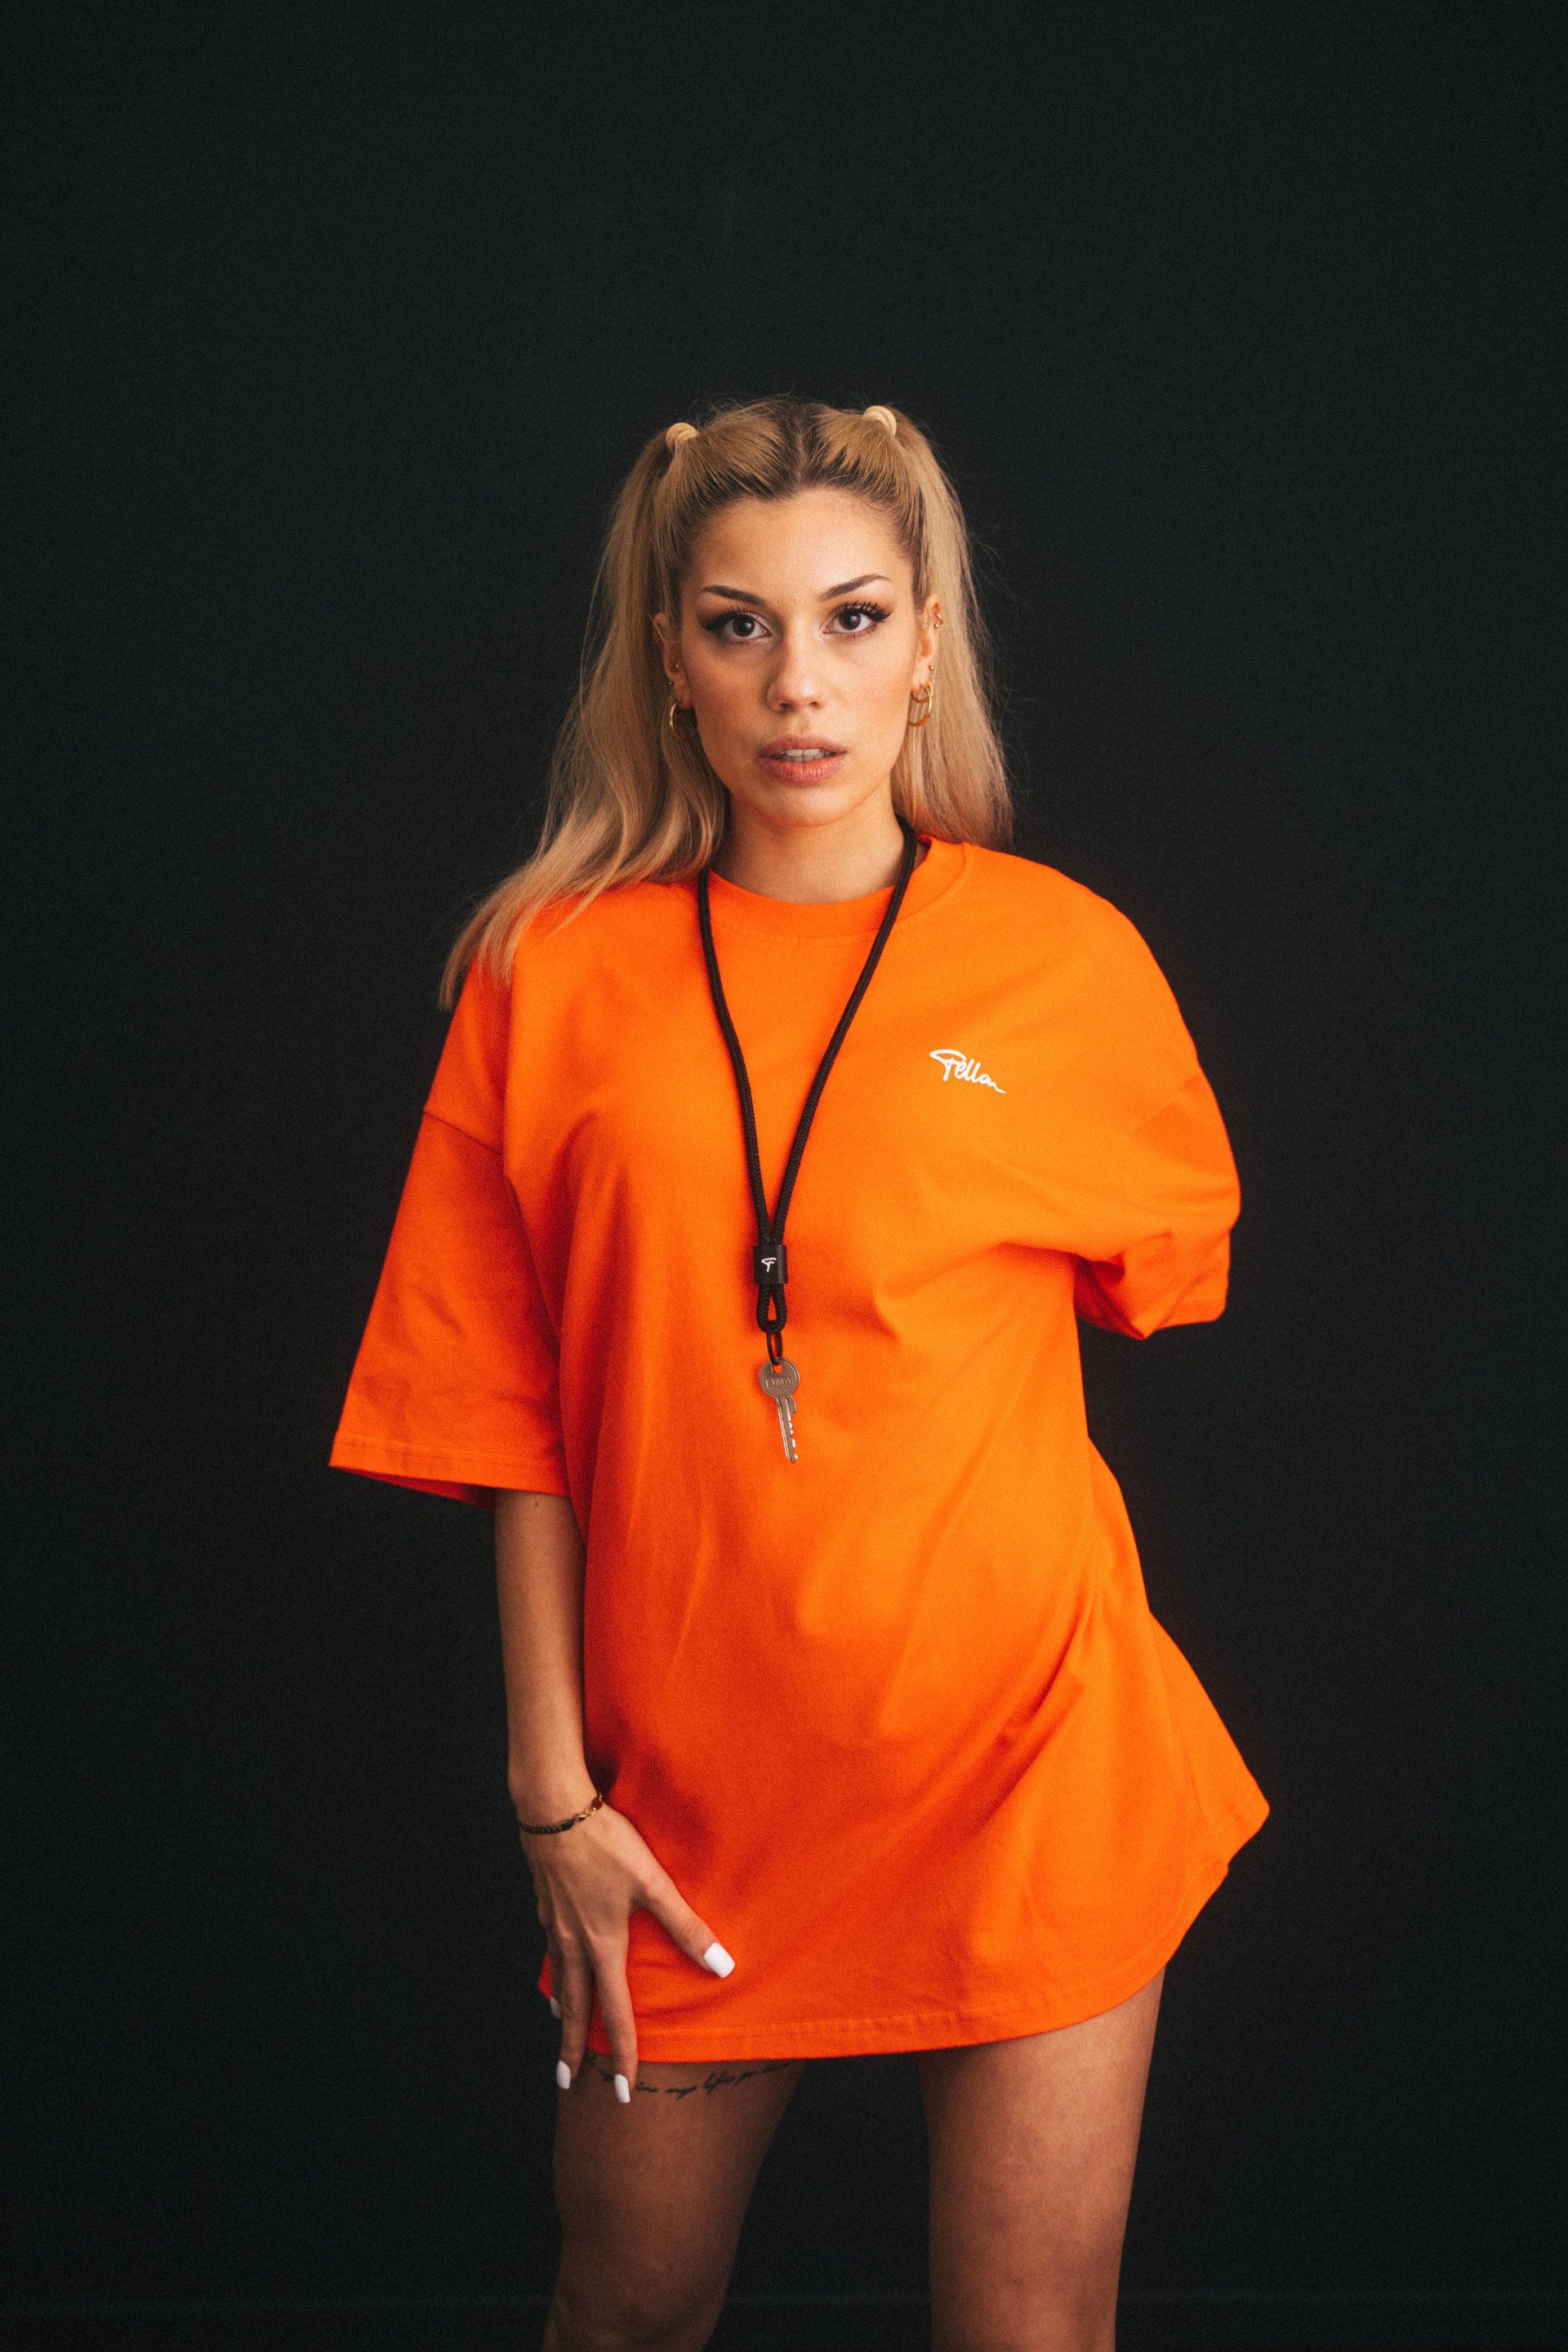 A self-confident young woman in a bright orange, oversized T-shirt stands in front of a dark background, captured by an event photographer from Aschaffenburg, her gaze directed at the camera with subtle intensity.